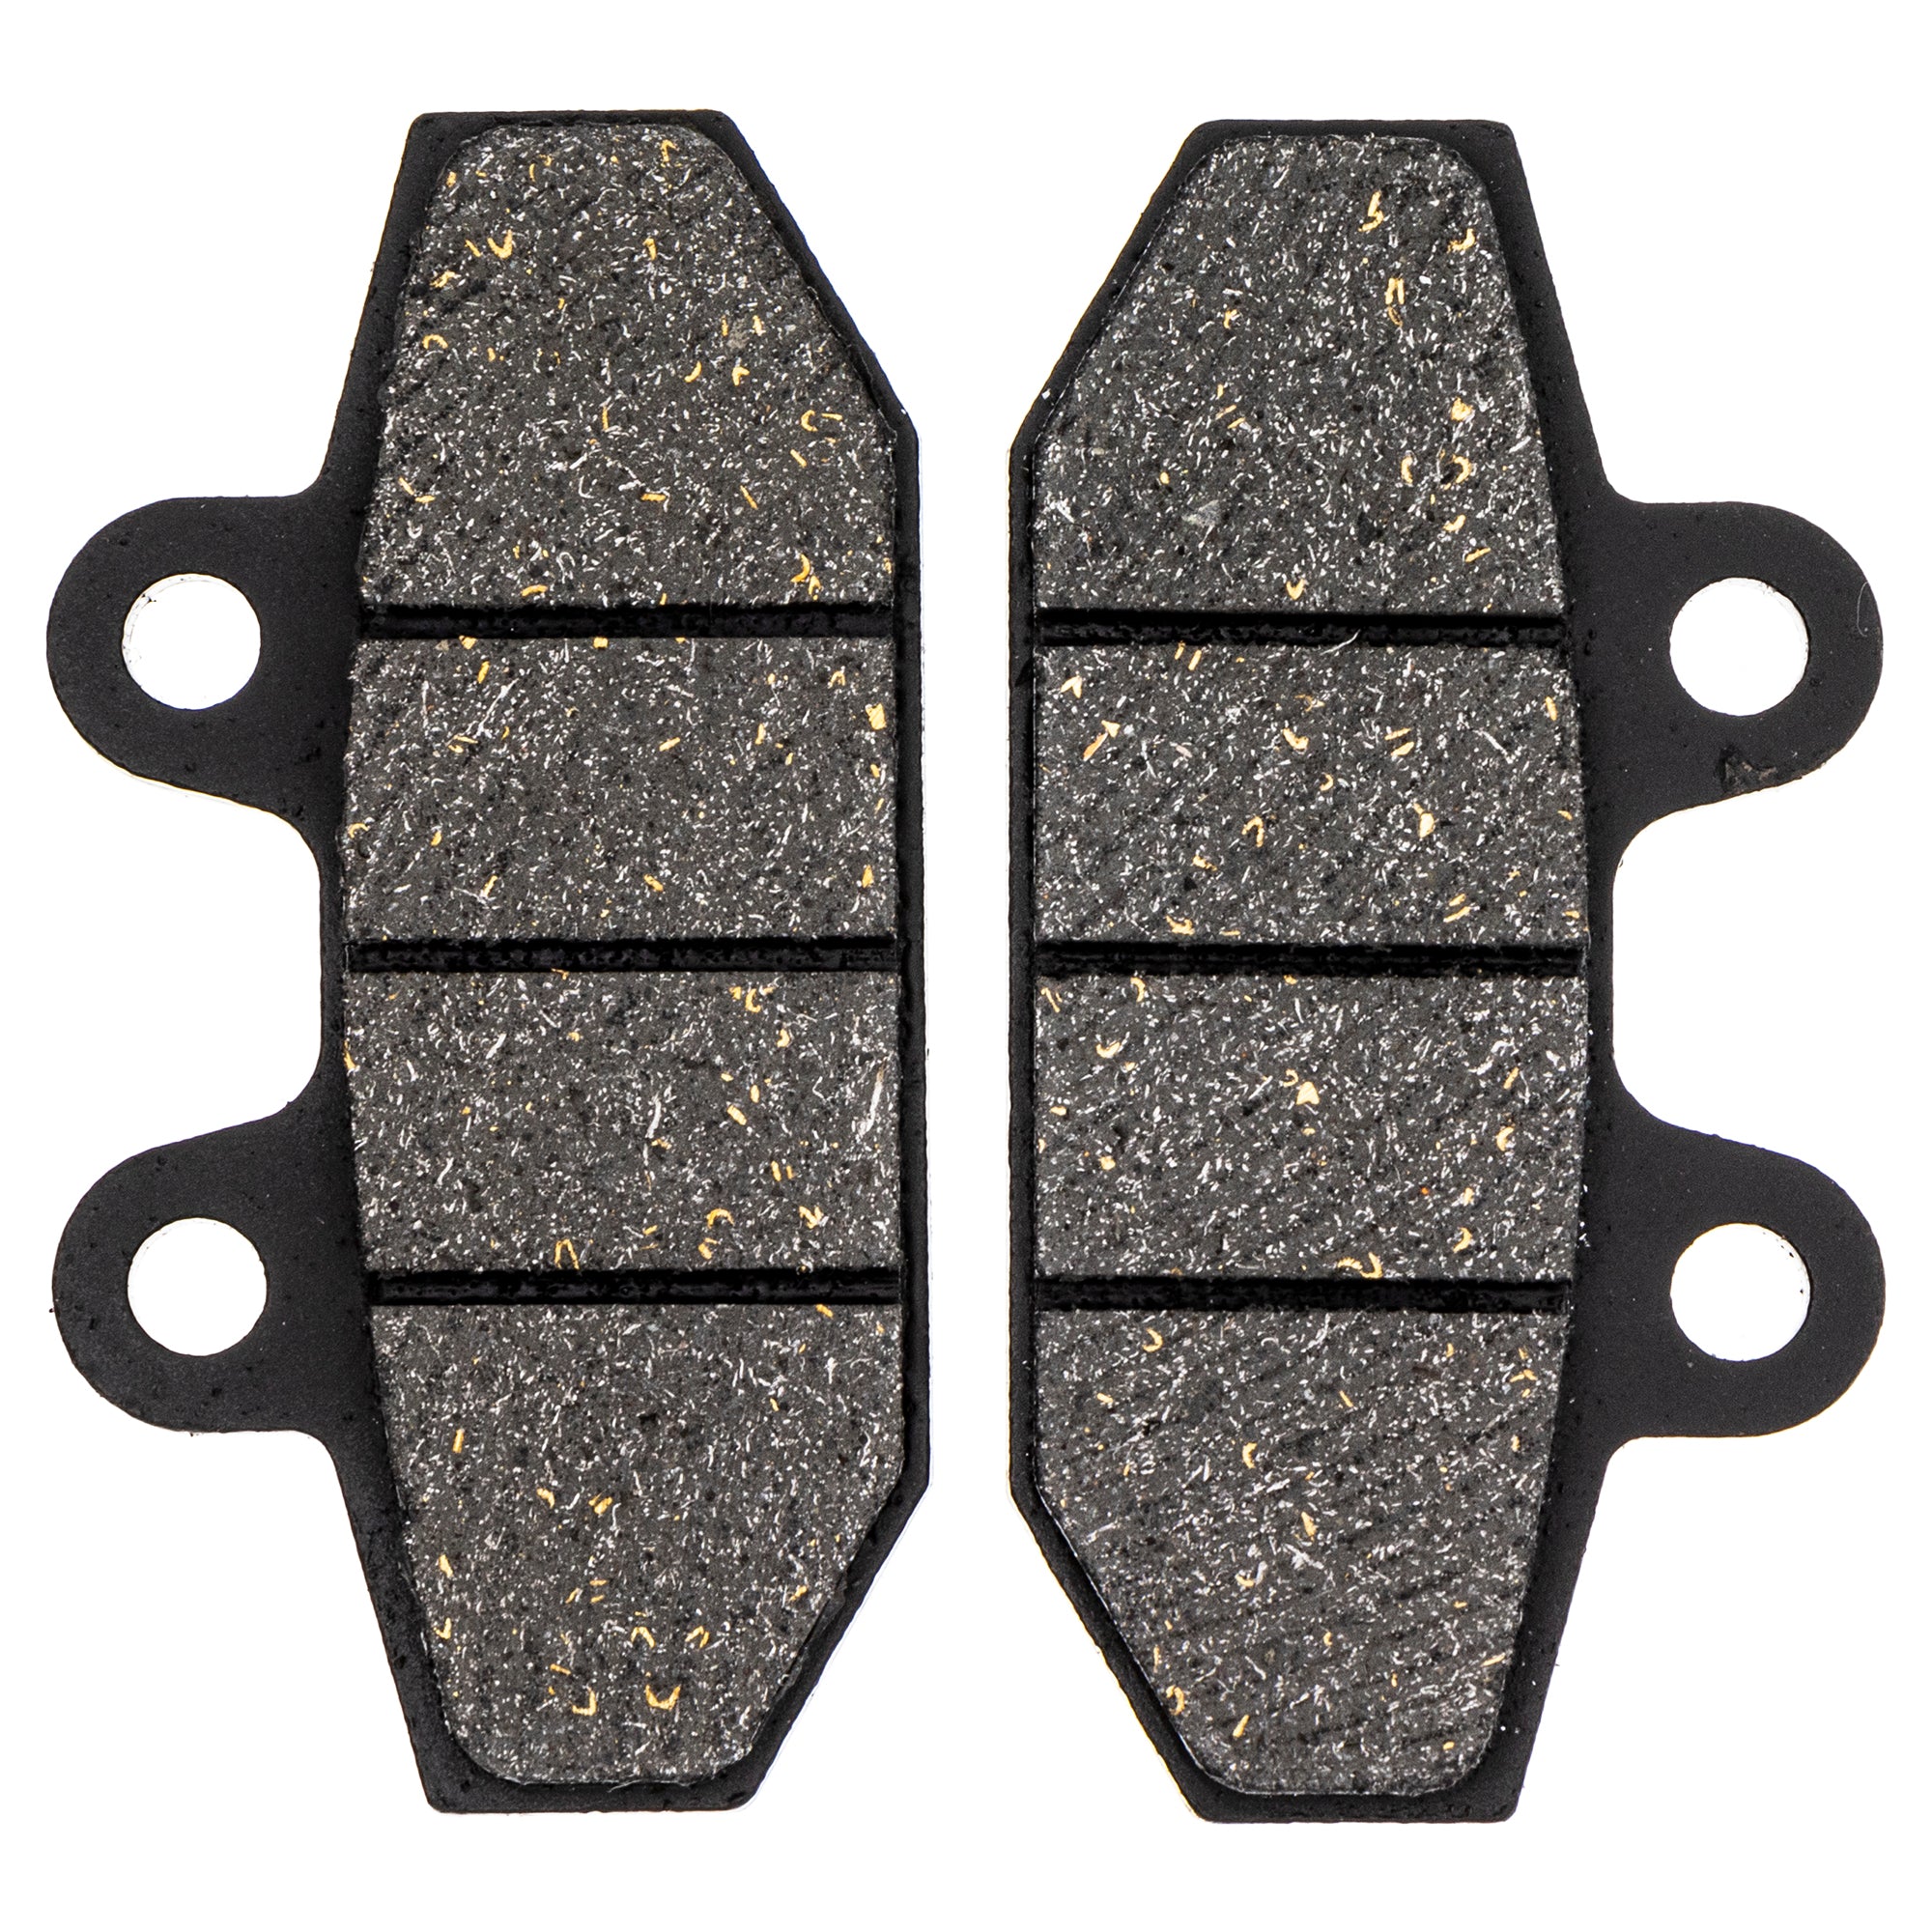 Brake Pad Set for Harley-Davidson Low Rider Deluxe Fat Bob Front Rear